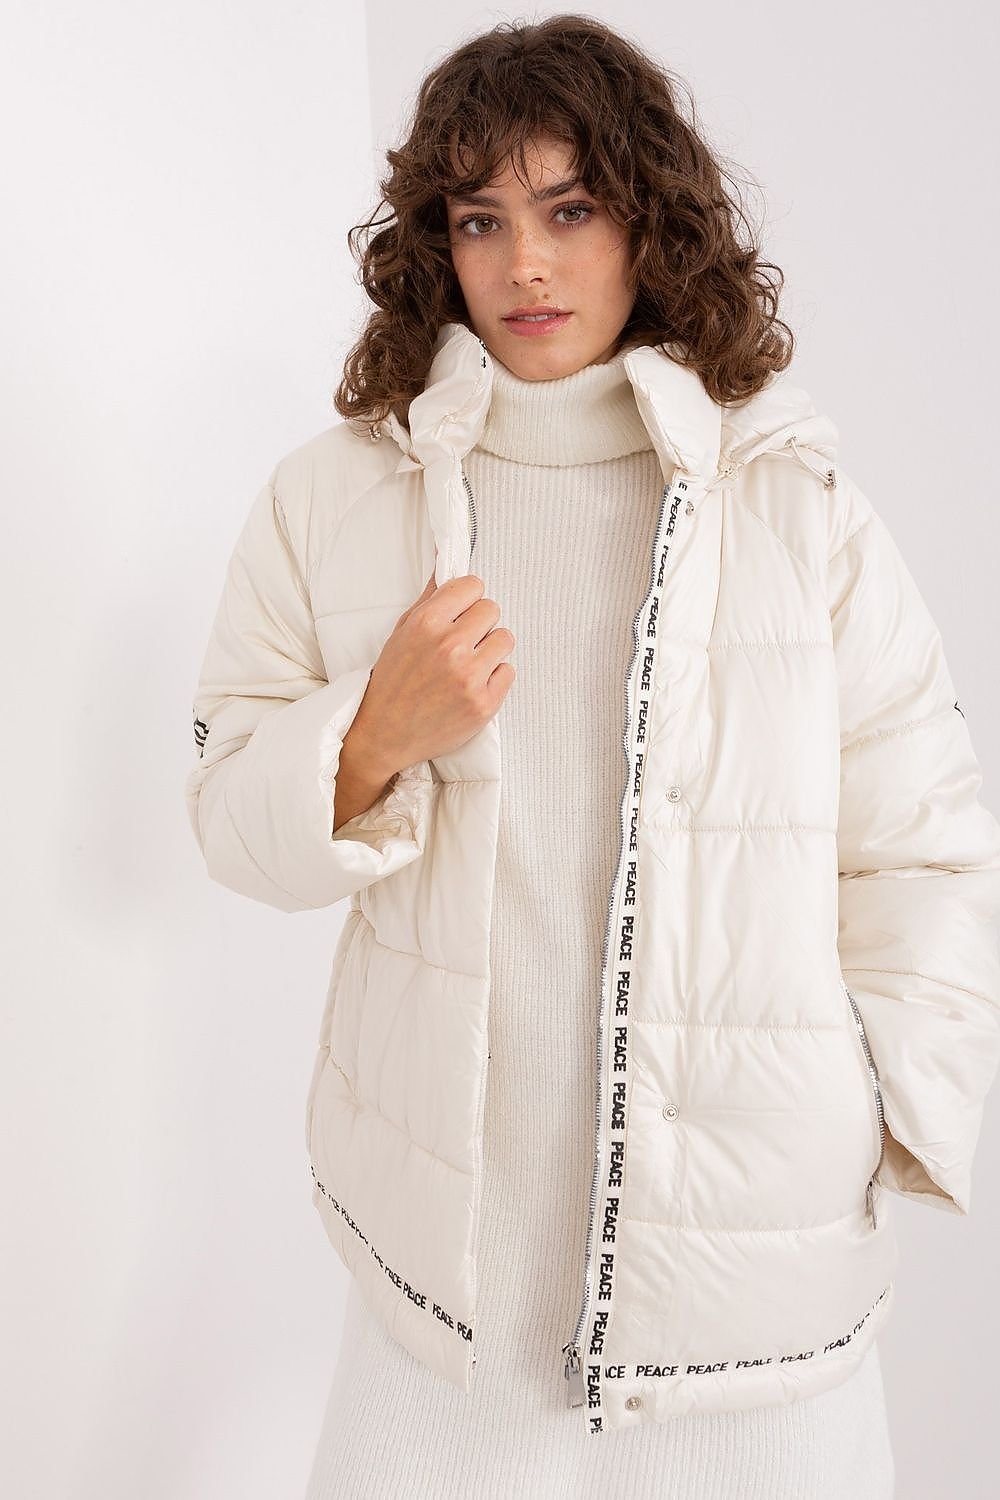 Beige quilted jacket with a detachable hood